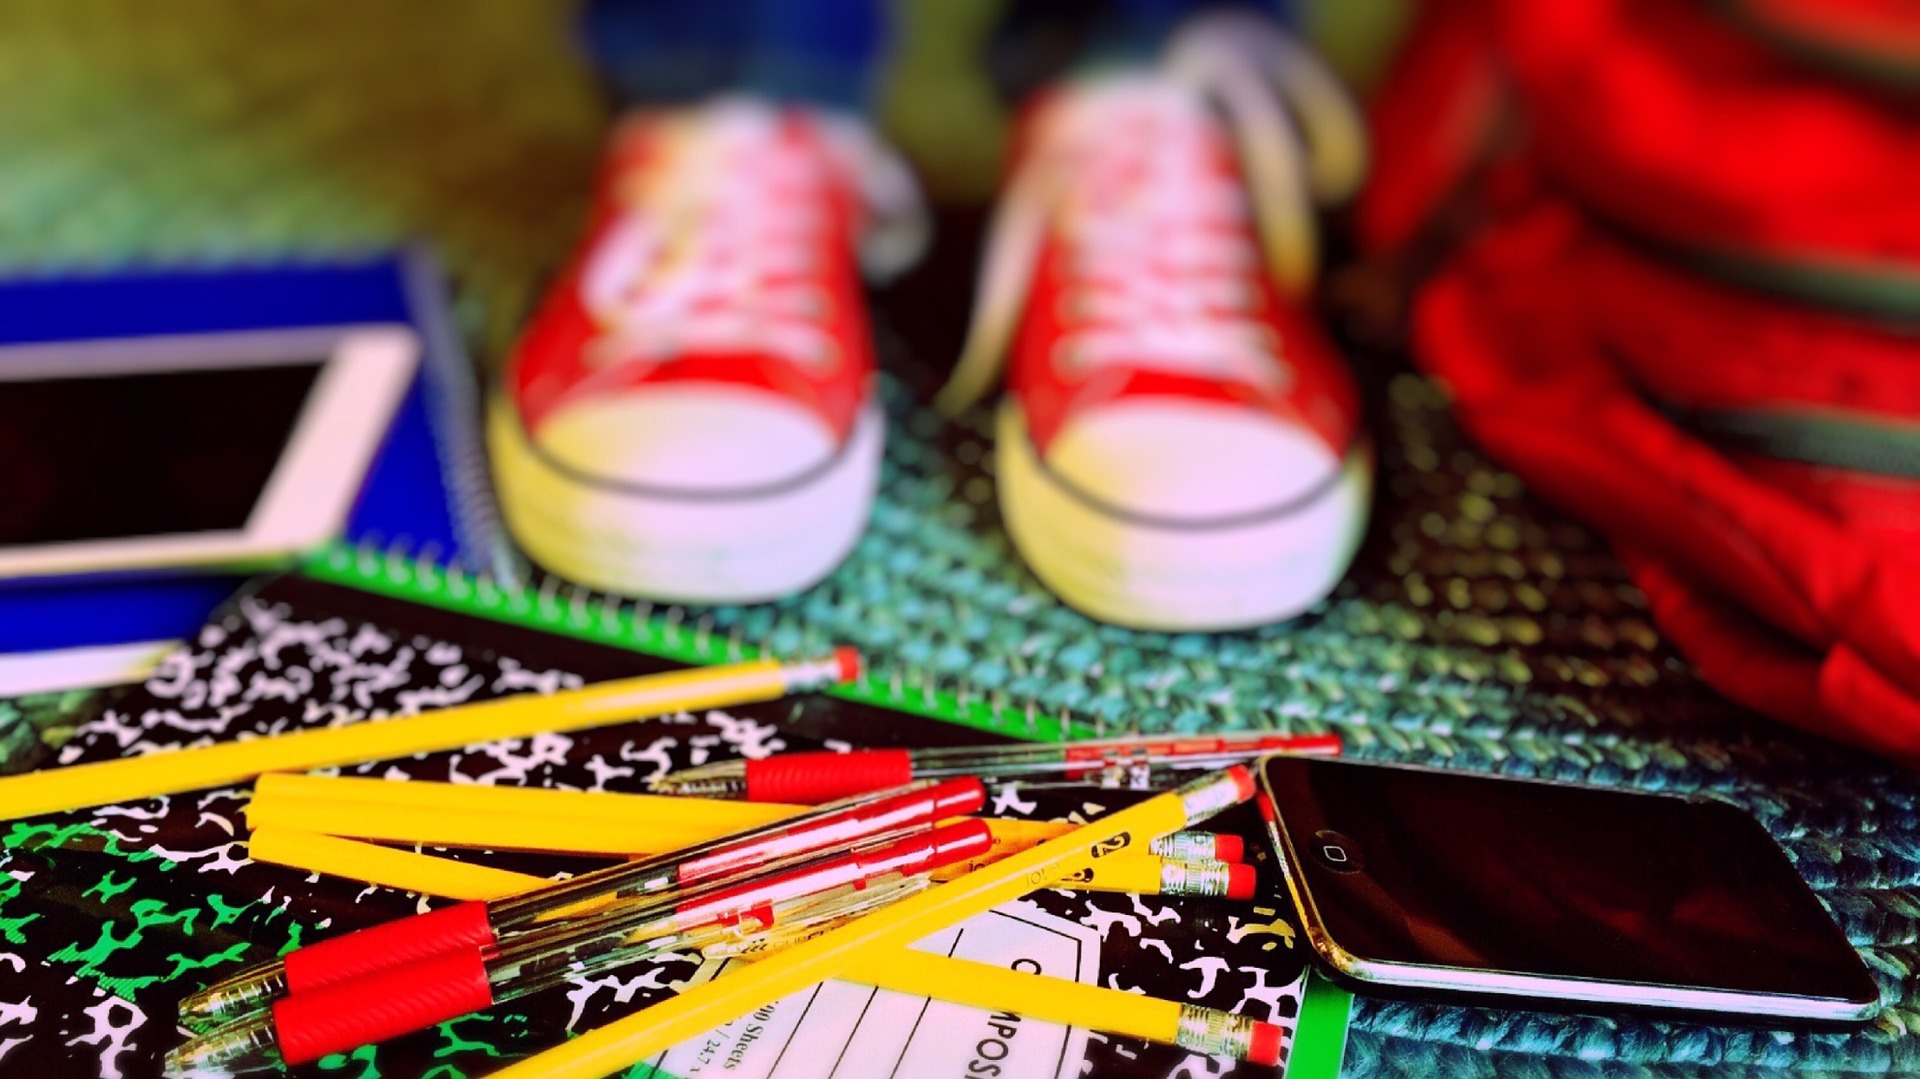 How do you get noticed by back to school shoppers?